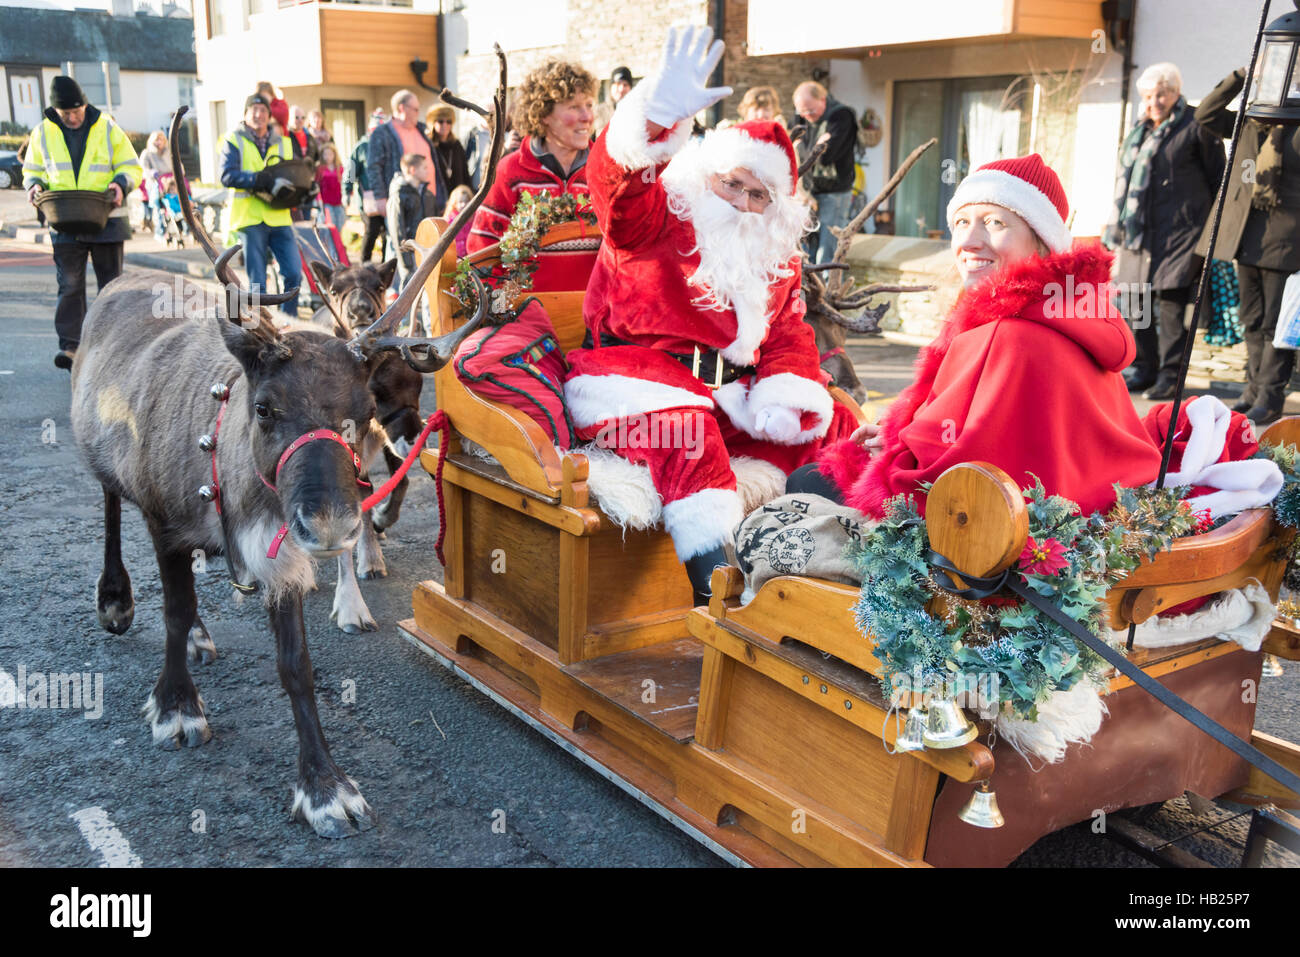 Keswick, Cumbria, UK 4th December 2016. People take part in the Keswick Victorian Christmas Fayre in the Lake District town. The annual event allows charities to promote their causes with Victorian themed stalls and entertainment.  Santa pays a visit accompanied by the Cairngorm Reindeer, the UK’s only free ranging herd. Credit Julian Eales/Alamy Live News Stock Photo